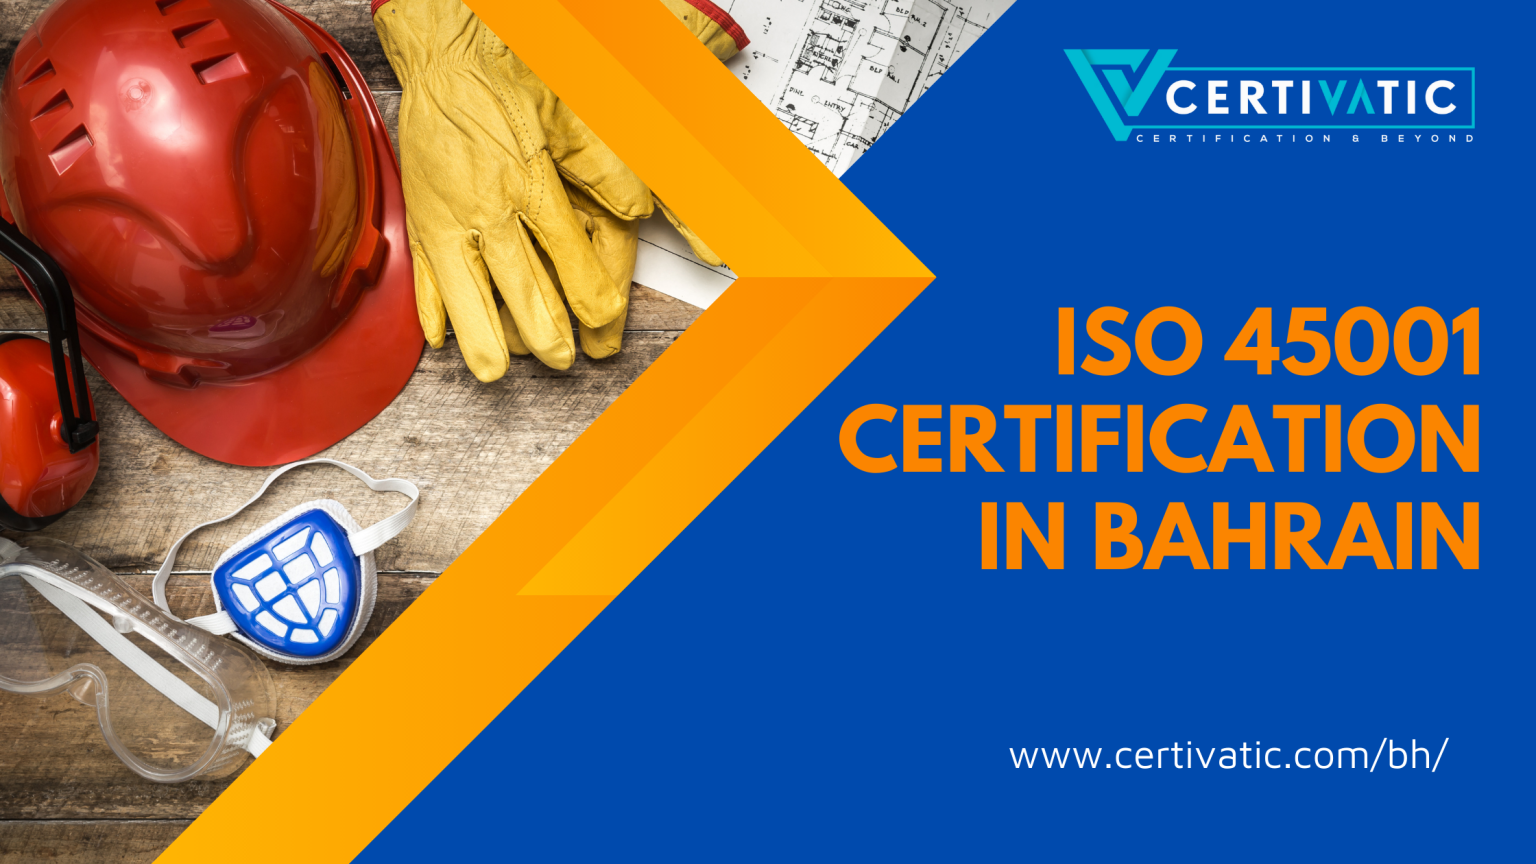 Why and How to get ISO 45001 Certification in Bahrain